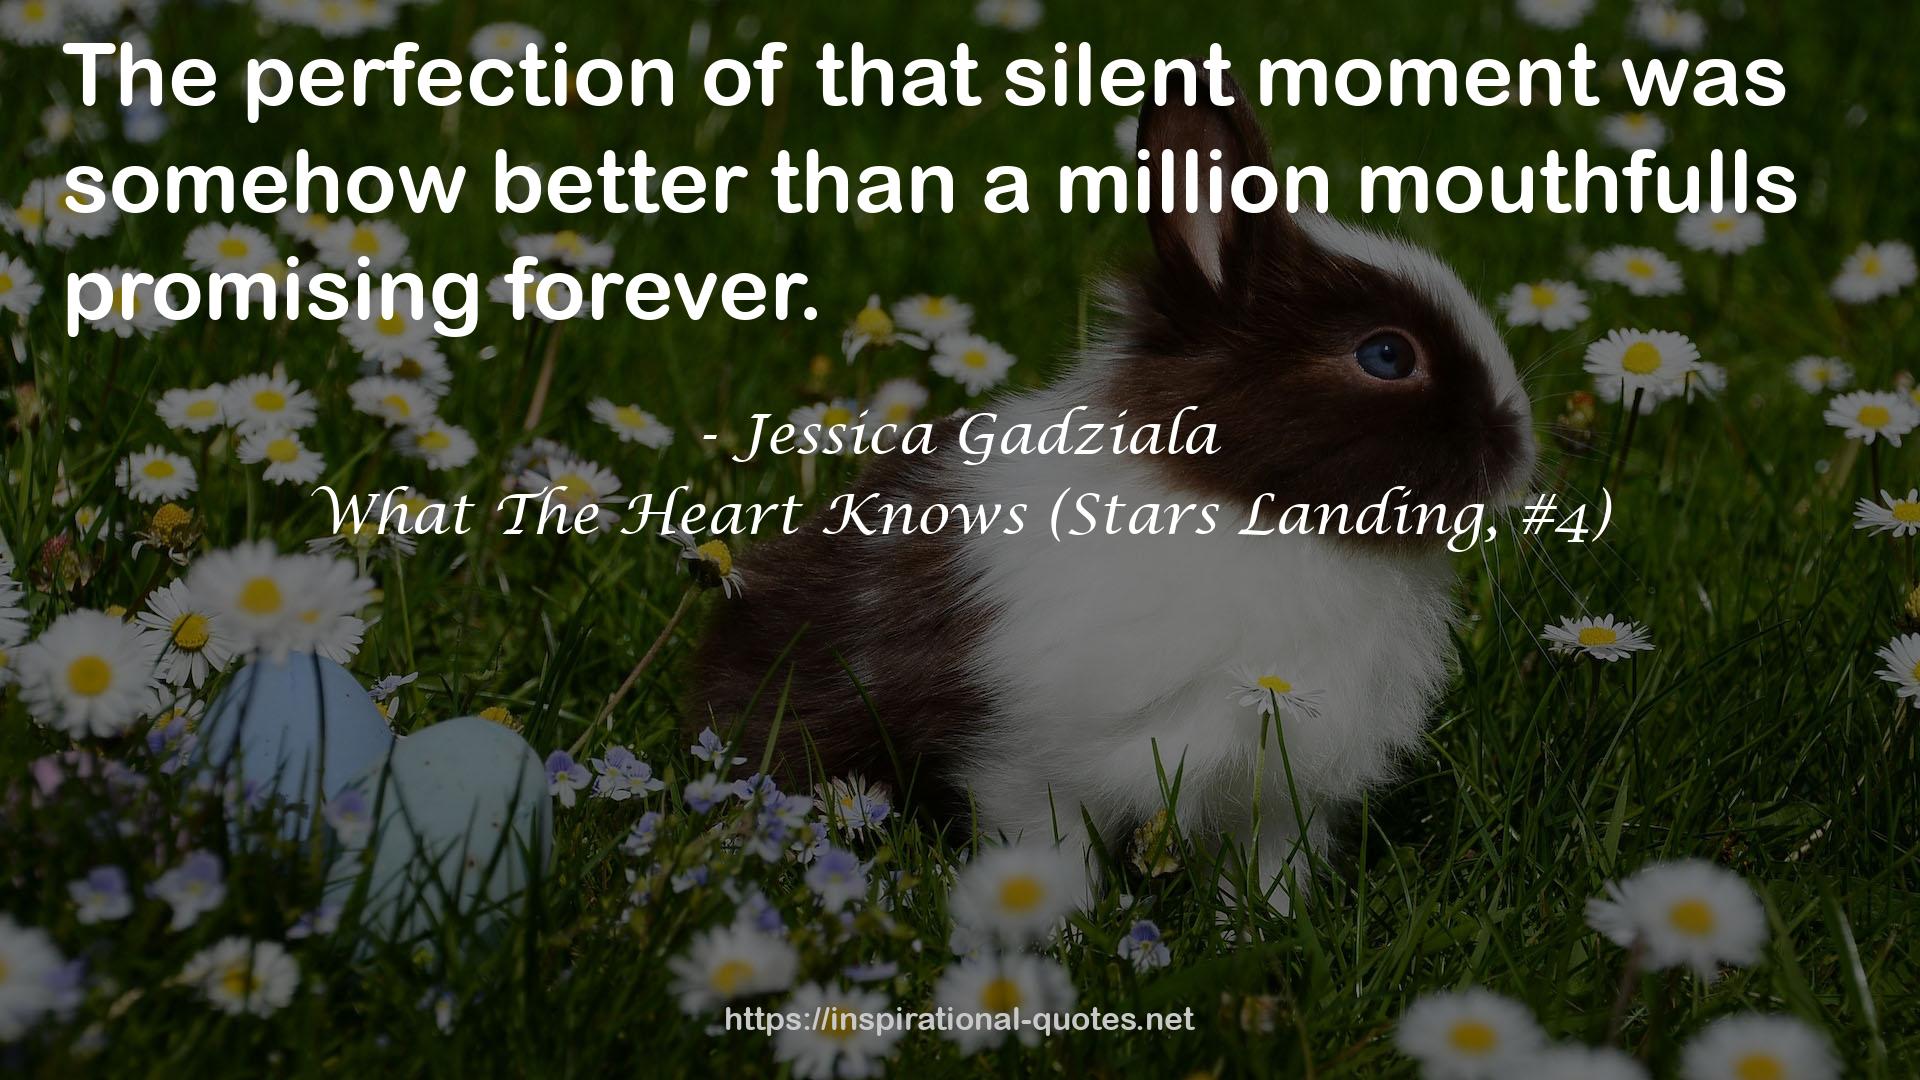 What The Heart Knows (Stars Landing, #4) QUOTES